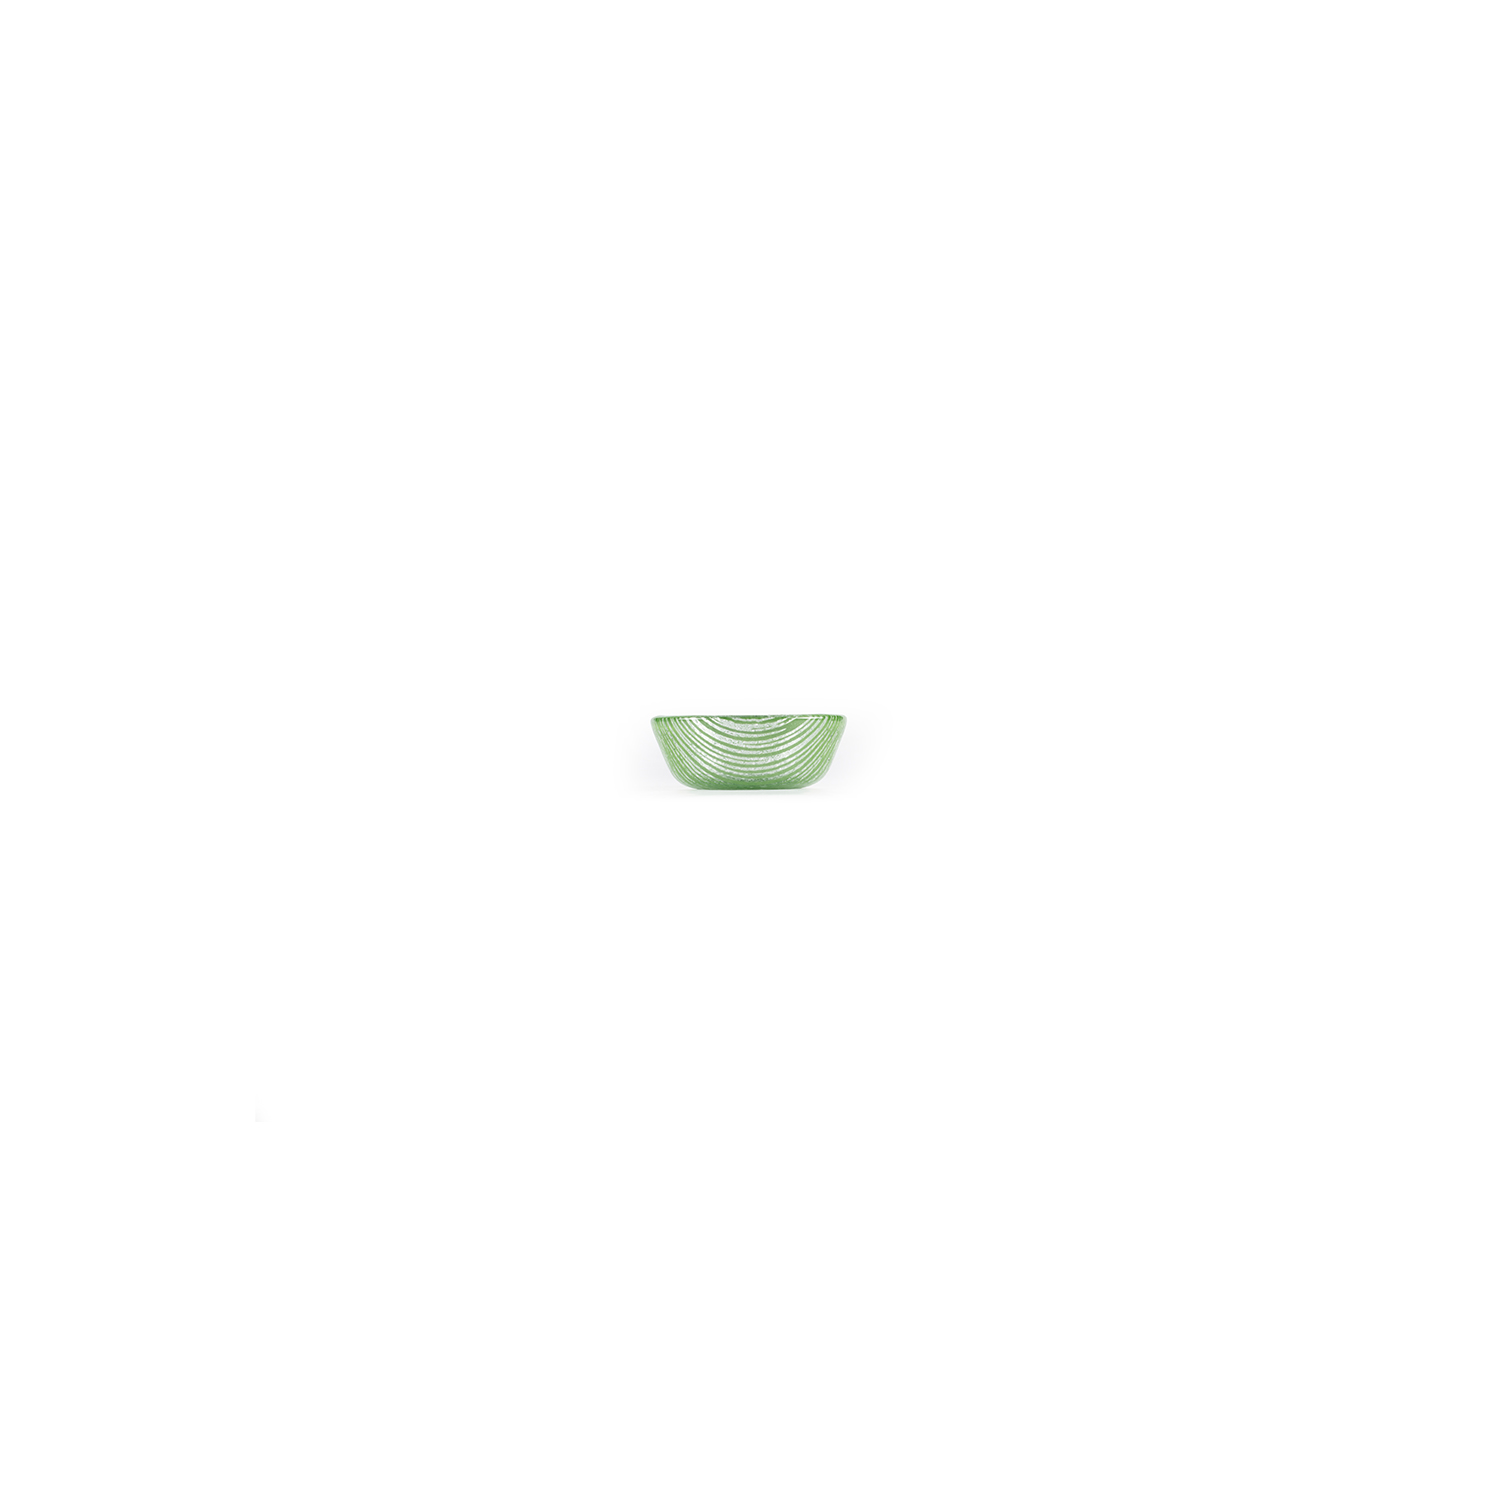 Fusion Glass Bowl Green Round 2.75″ x 2.75″ x 1.25″  4 oz. CasePack:24